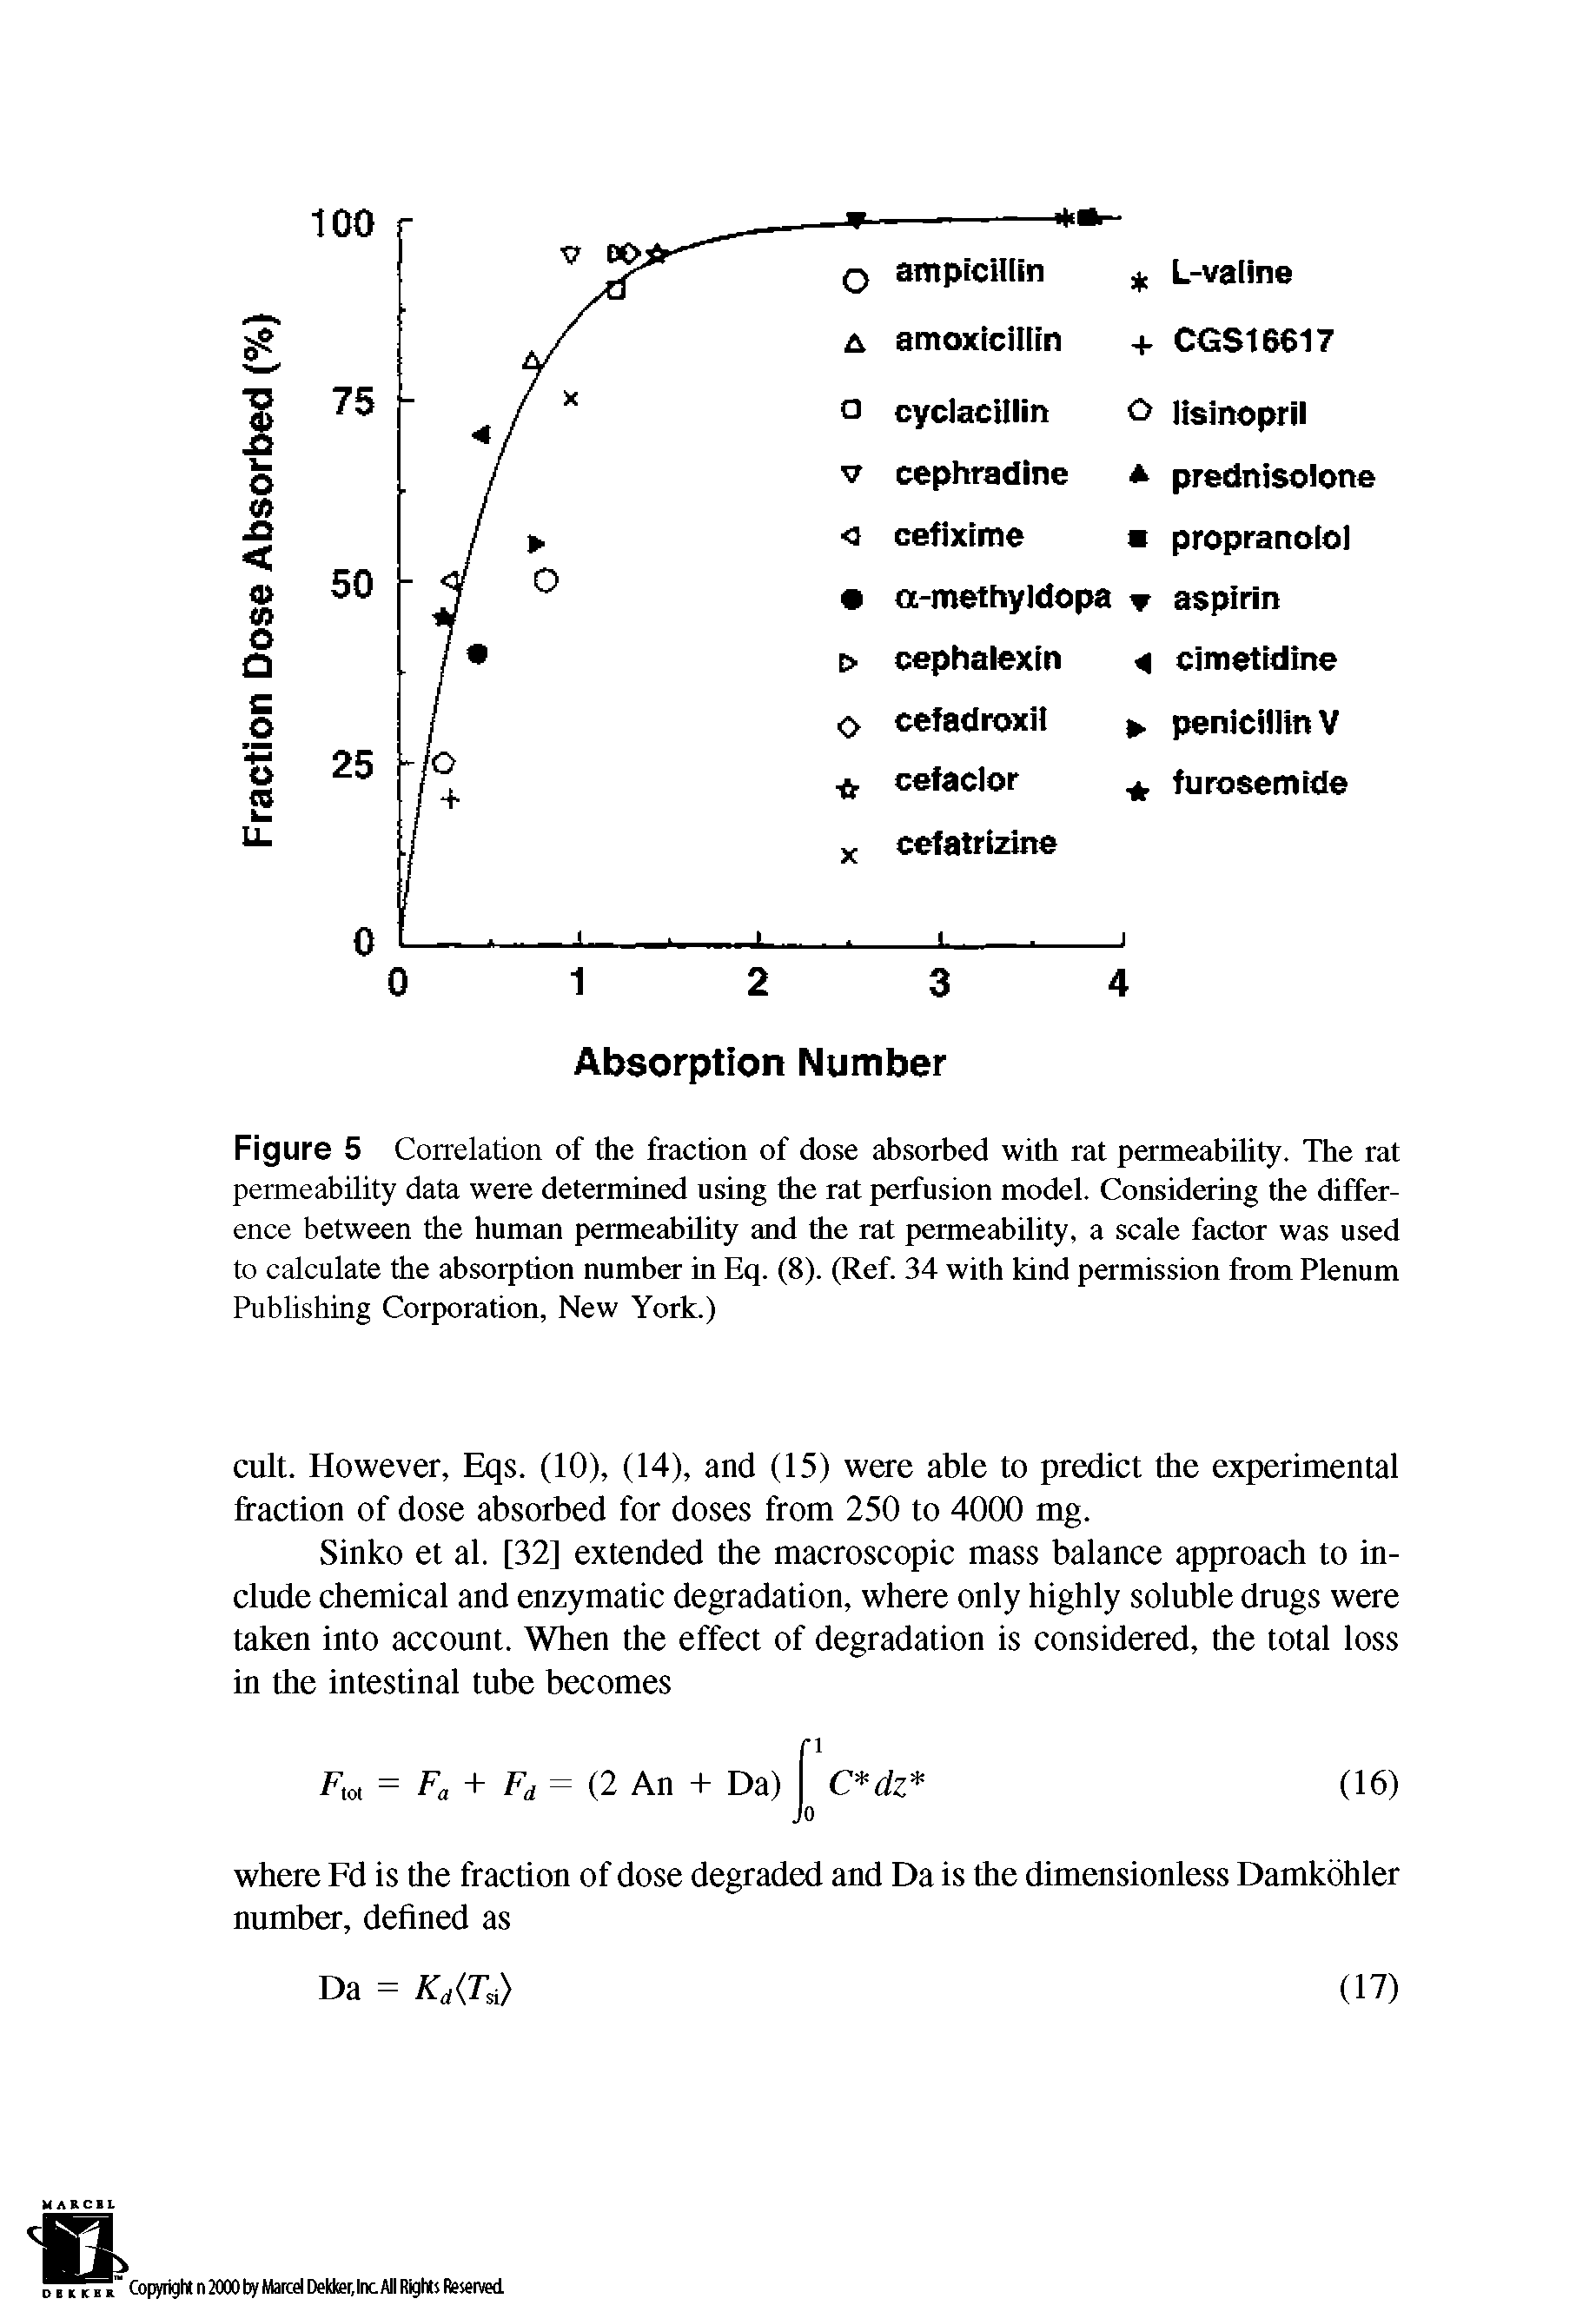 Figure 5 Correlation of the fraction of dose absorbed with rat permeability. The rat permeability data were determined using the rat perfusion model. Considering the difference between the human permeability and the rat permeability, a scale factor was used to calculate the absorption number in Eq. (8). (Ref. 34 with kind permission from Plenum Publishing Corporation, New York.)...